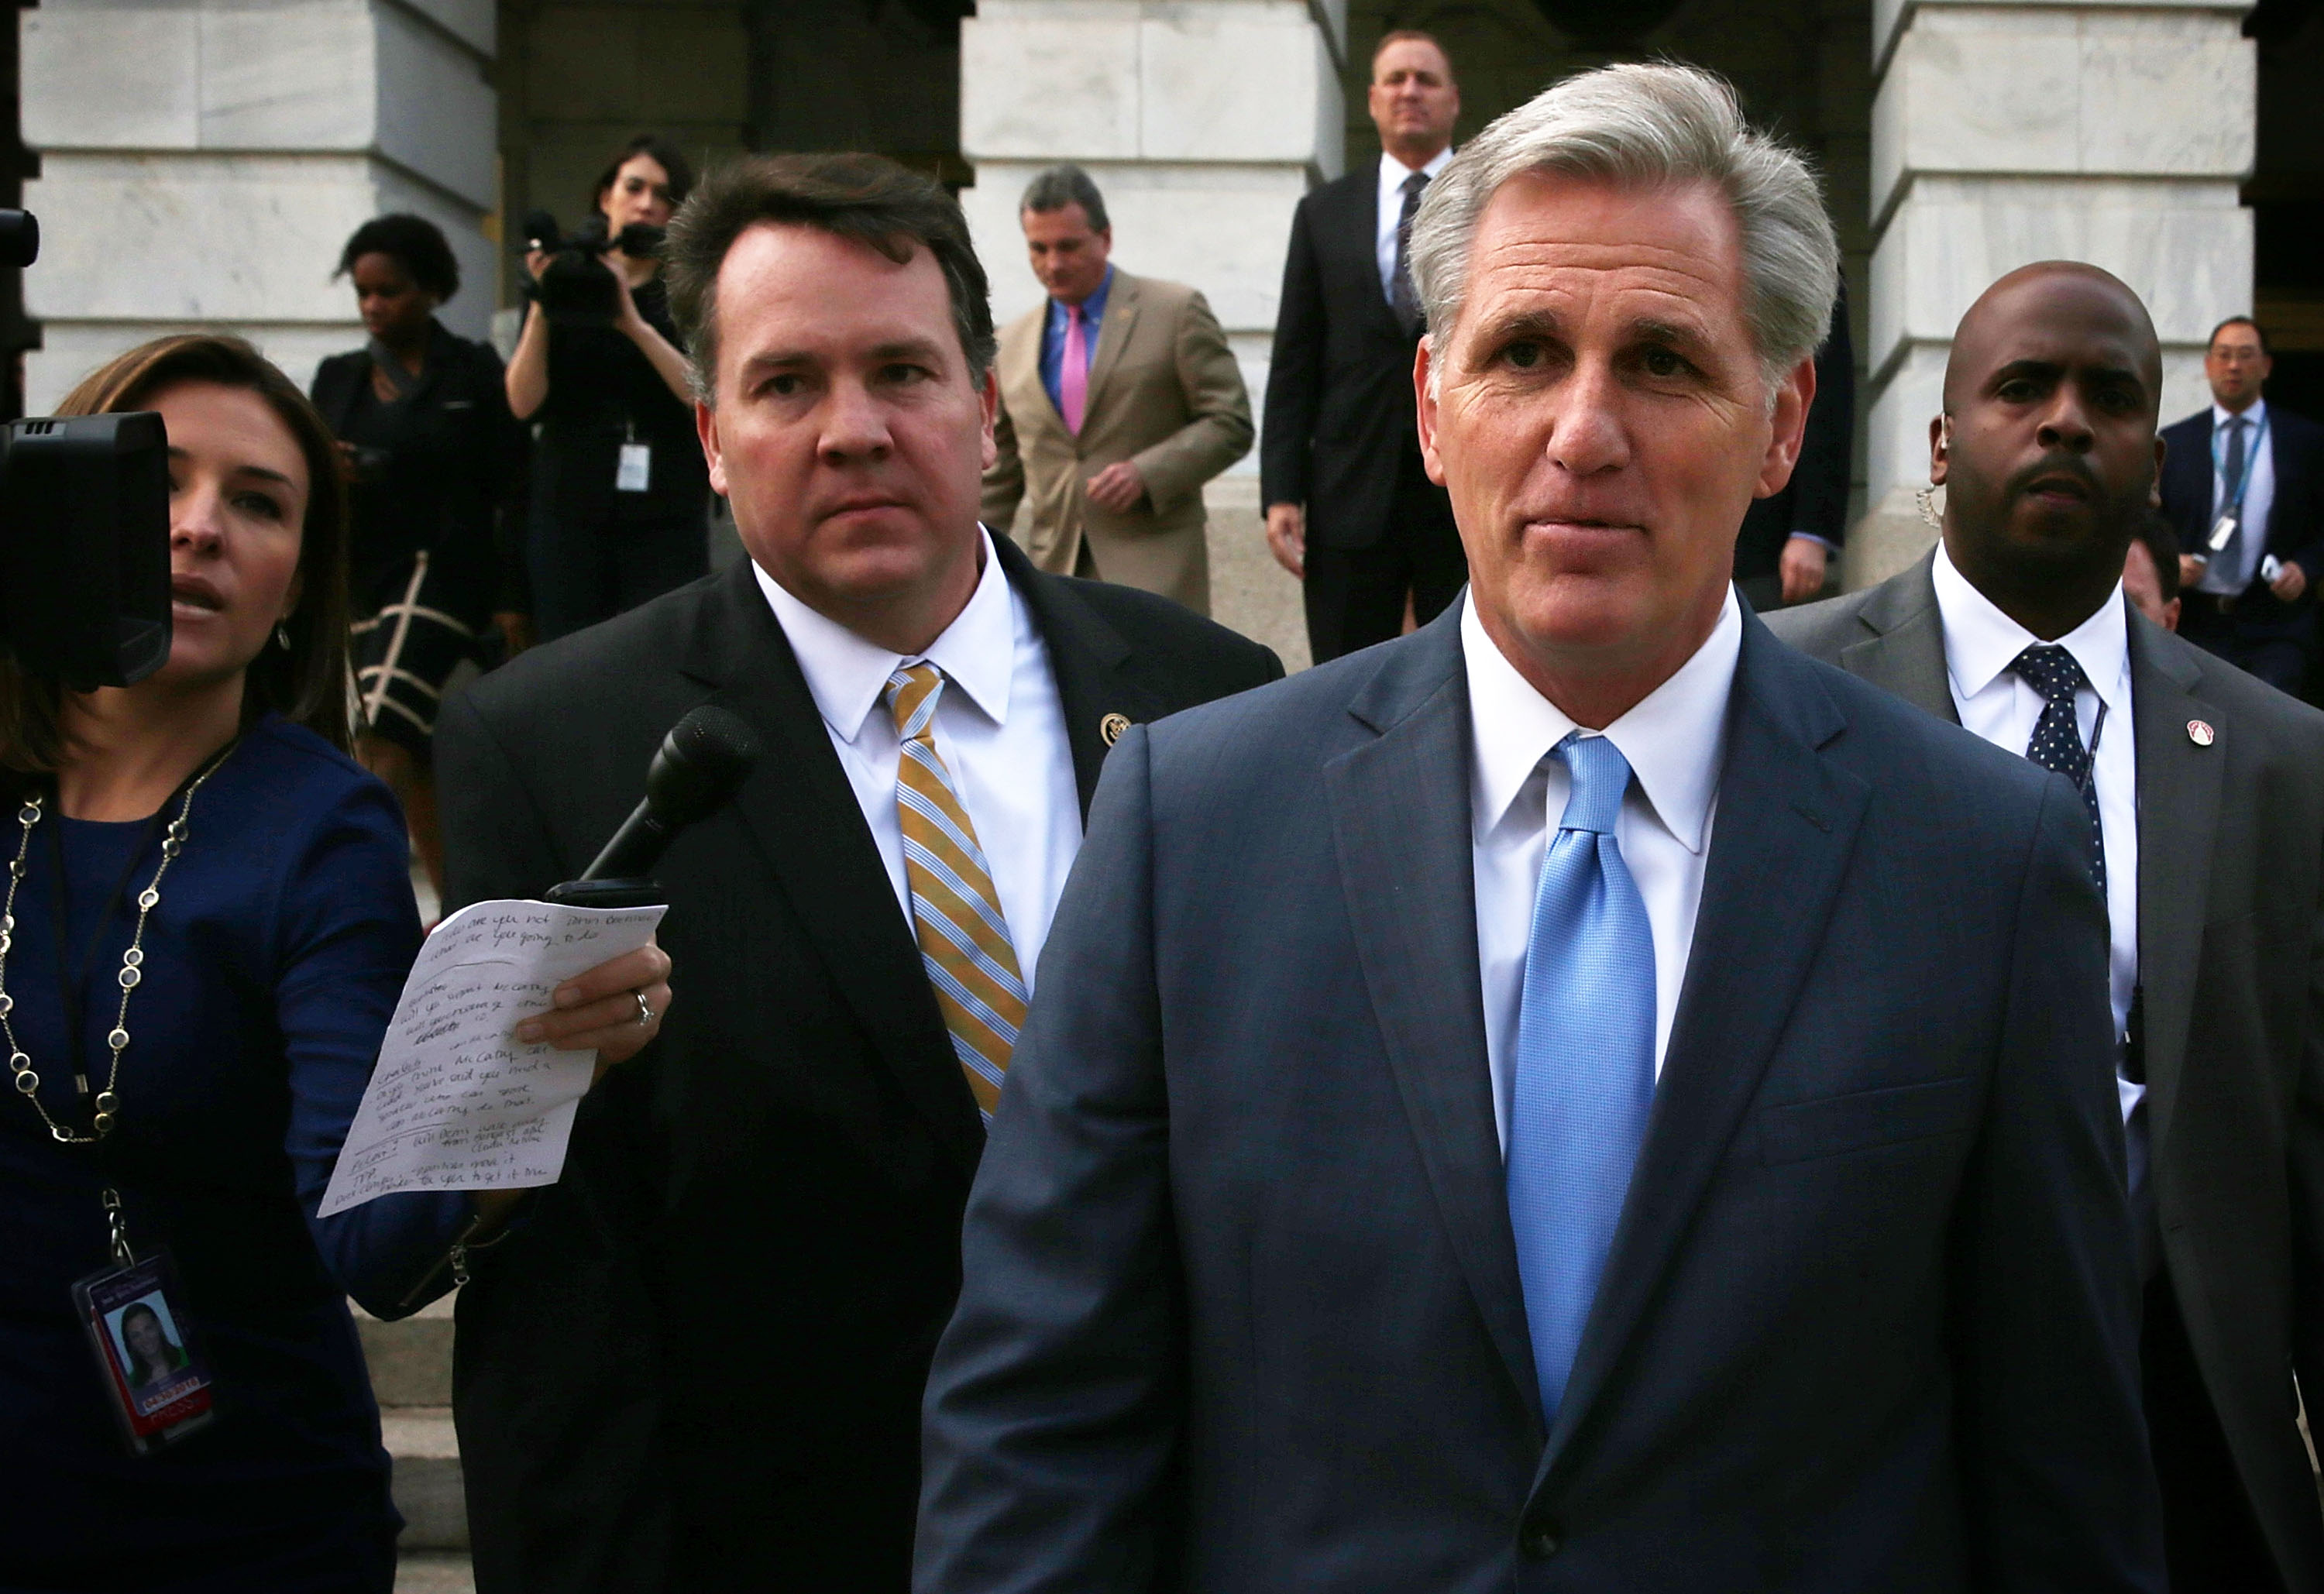 U.S. House Majority Leader Rep. Kevin McCarthy leaves after a closed House Republican election meeting to pick the next GOP House Speaker nominee October 8, 2015 on Capitol Hill in Washington, DC. Leader McCarthy has dropped out of the race for Speaker of the House. (Photo by Alex Wong/Getty Images)